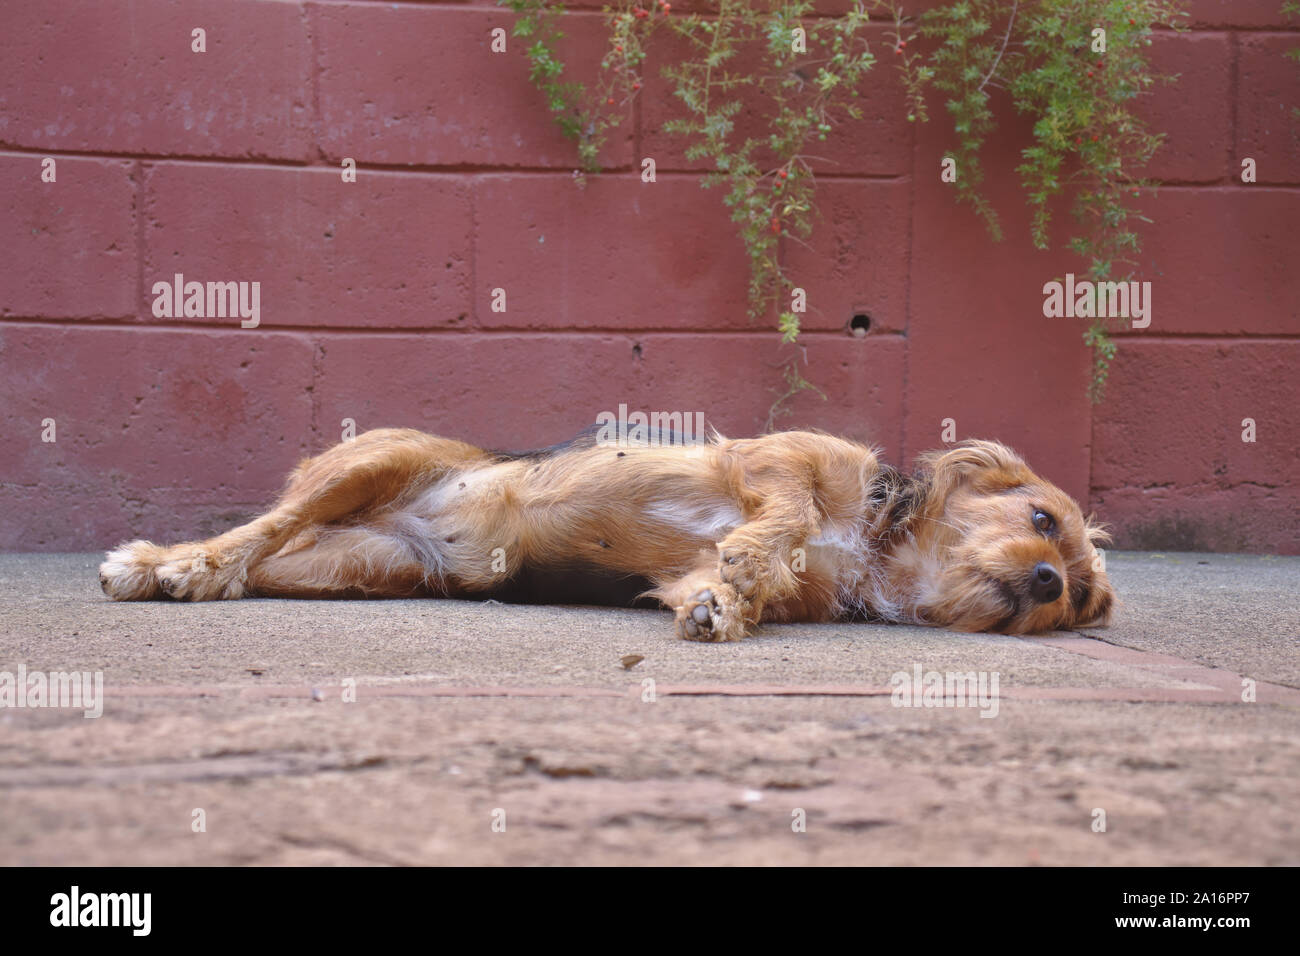 Dog lying comfortably on side looking into camera nearly falling asleep. red brick wll background. Stock Photo